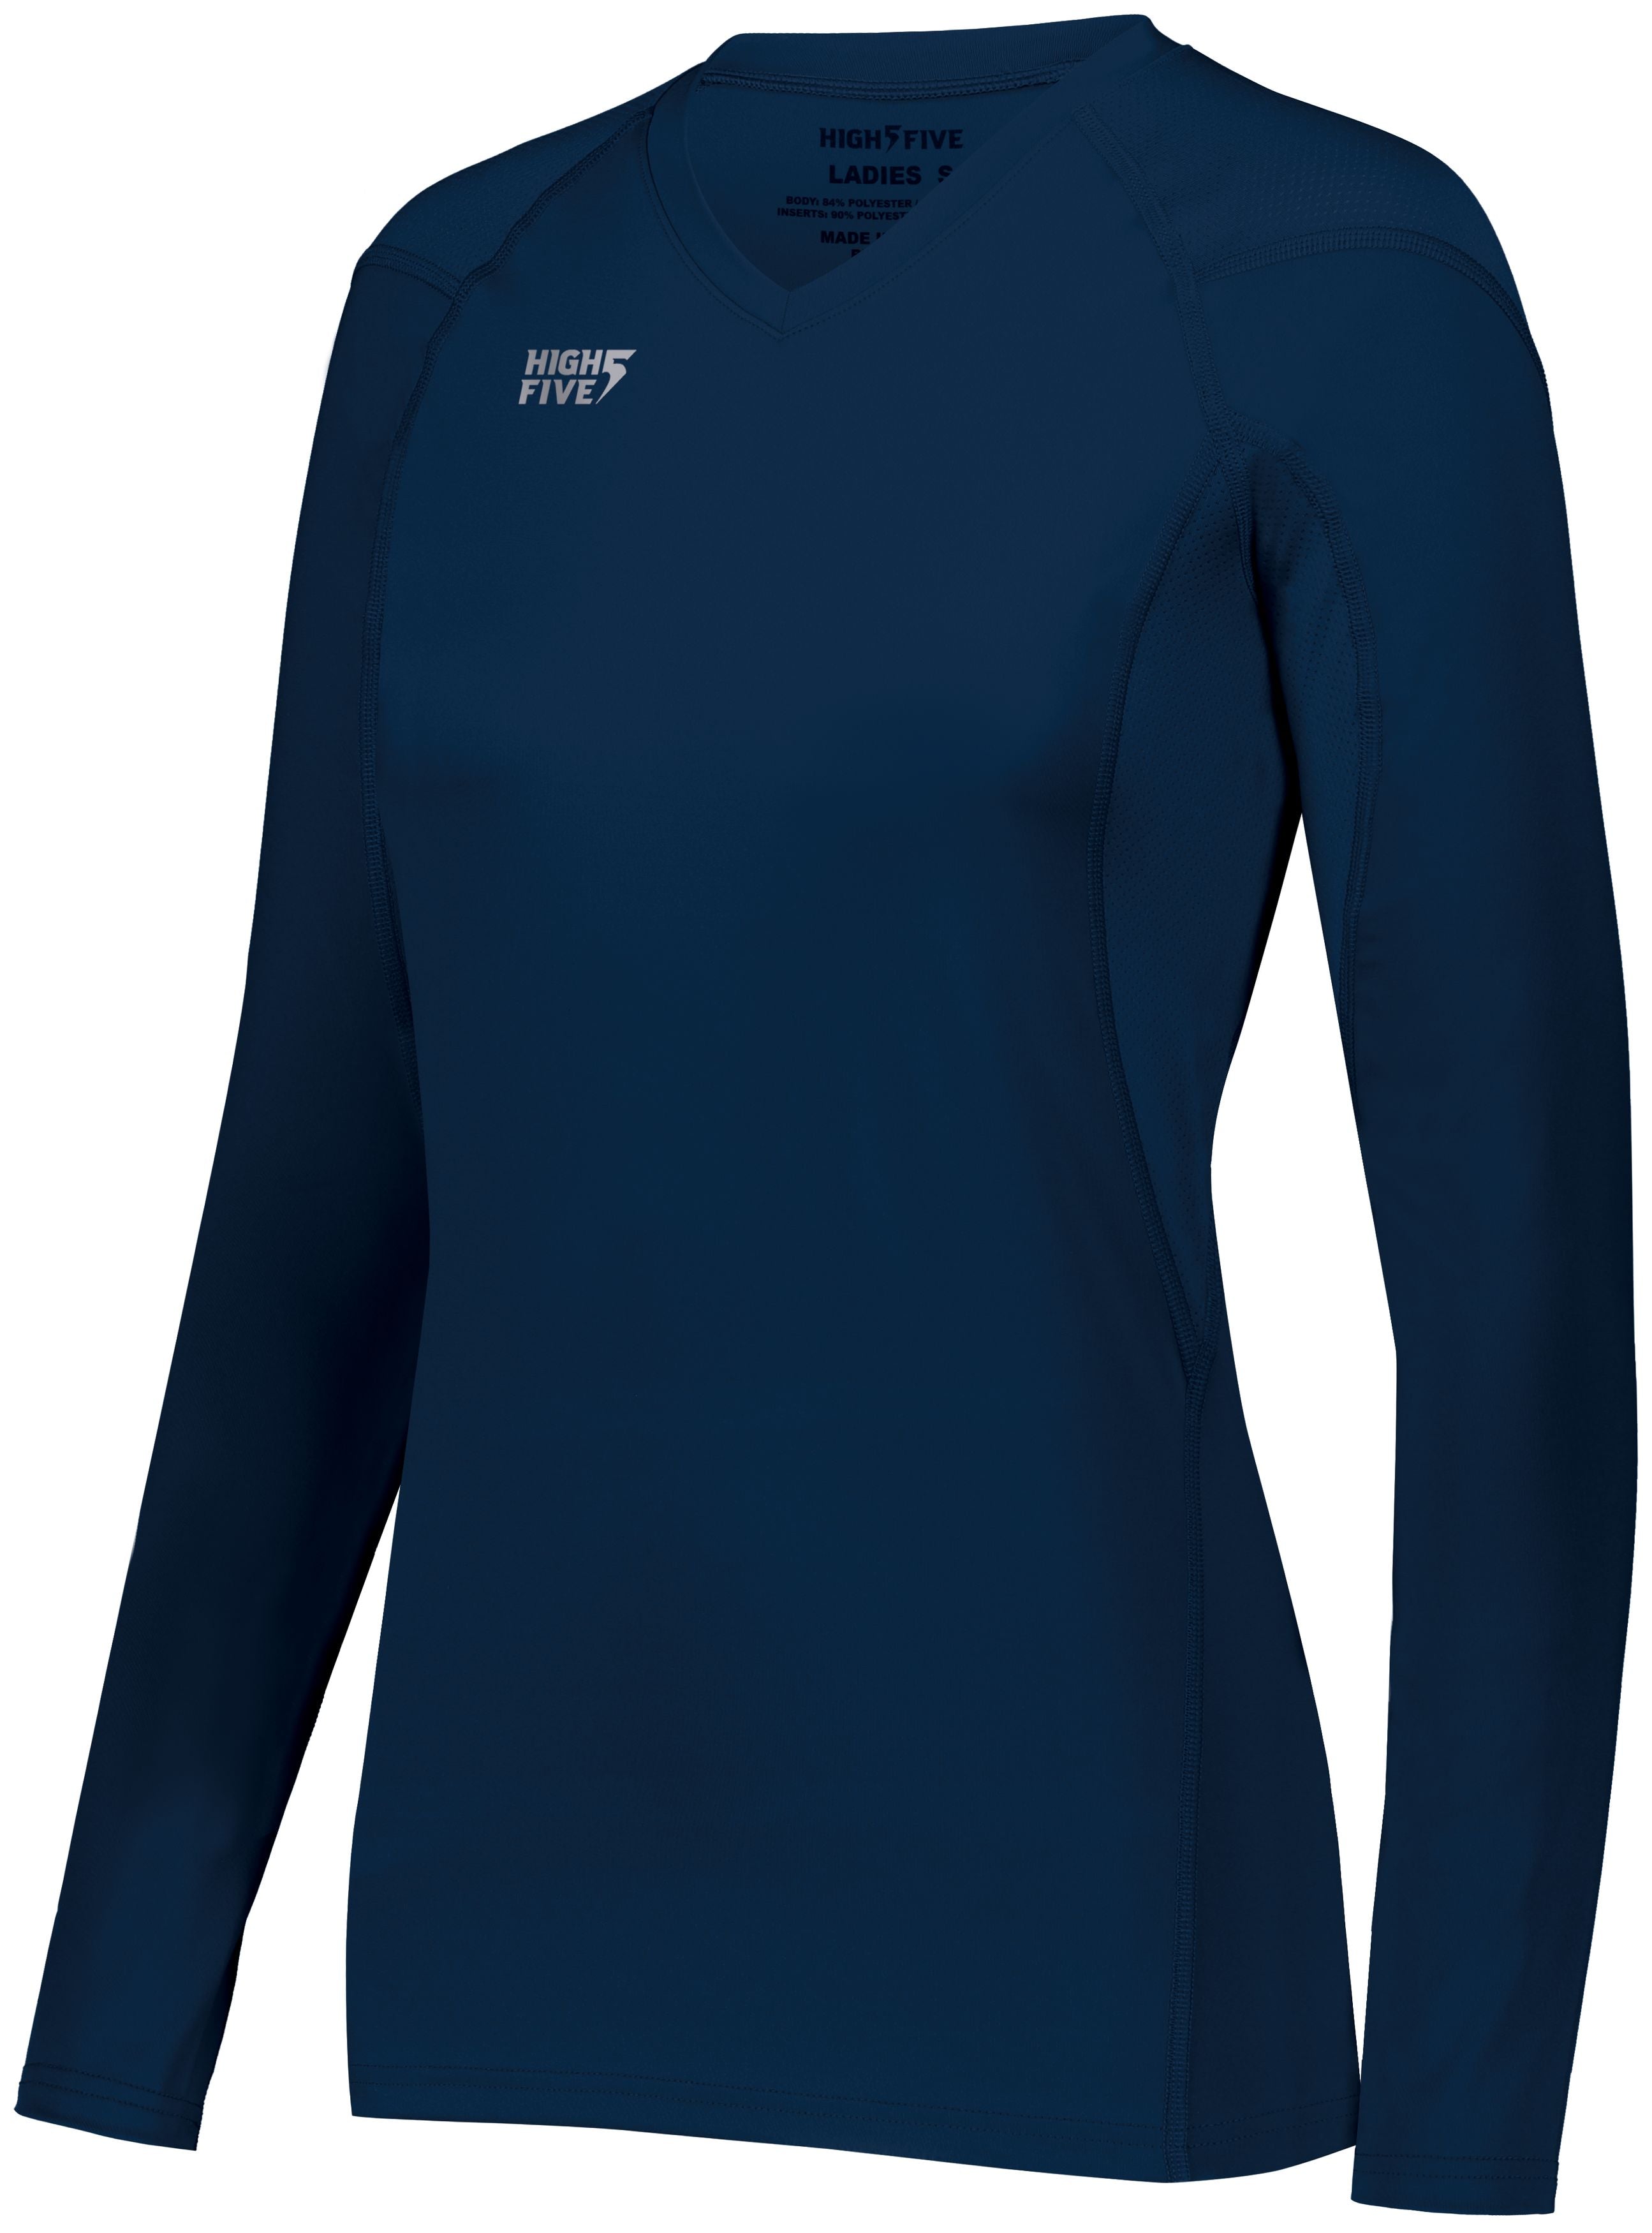 High 5 Girls Truhit Long Sleeve Jersey in Navy  -Part of the Girls, High5-Products, Volleyball, Girls-Jersey, Shirts product lines at KanaleyCreations.com